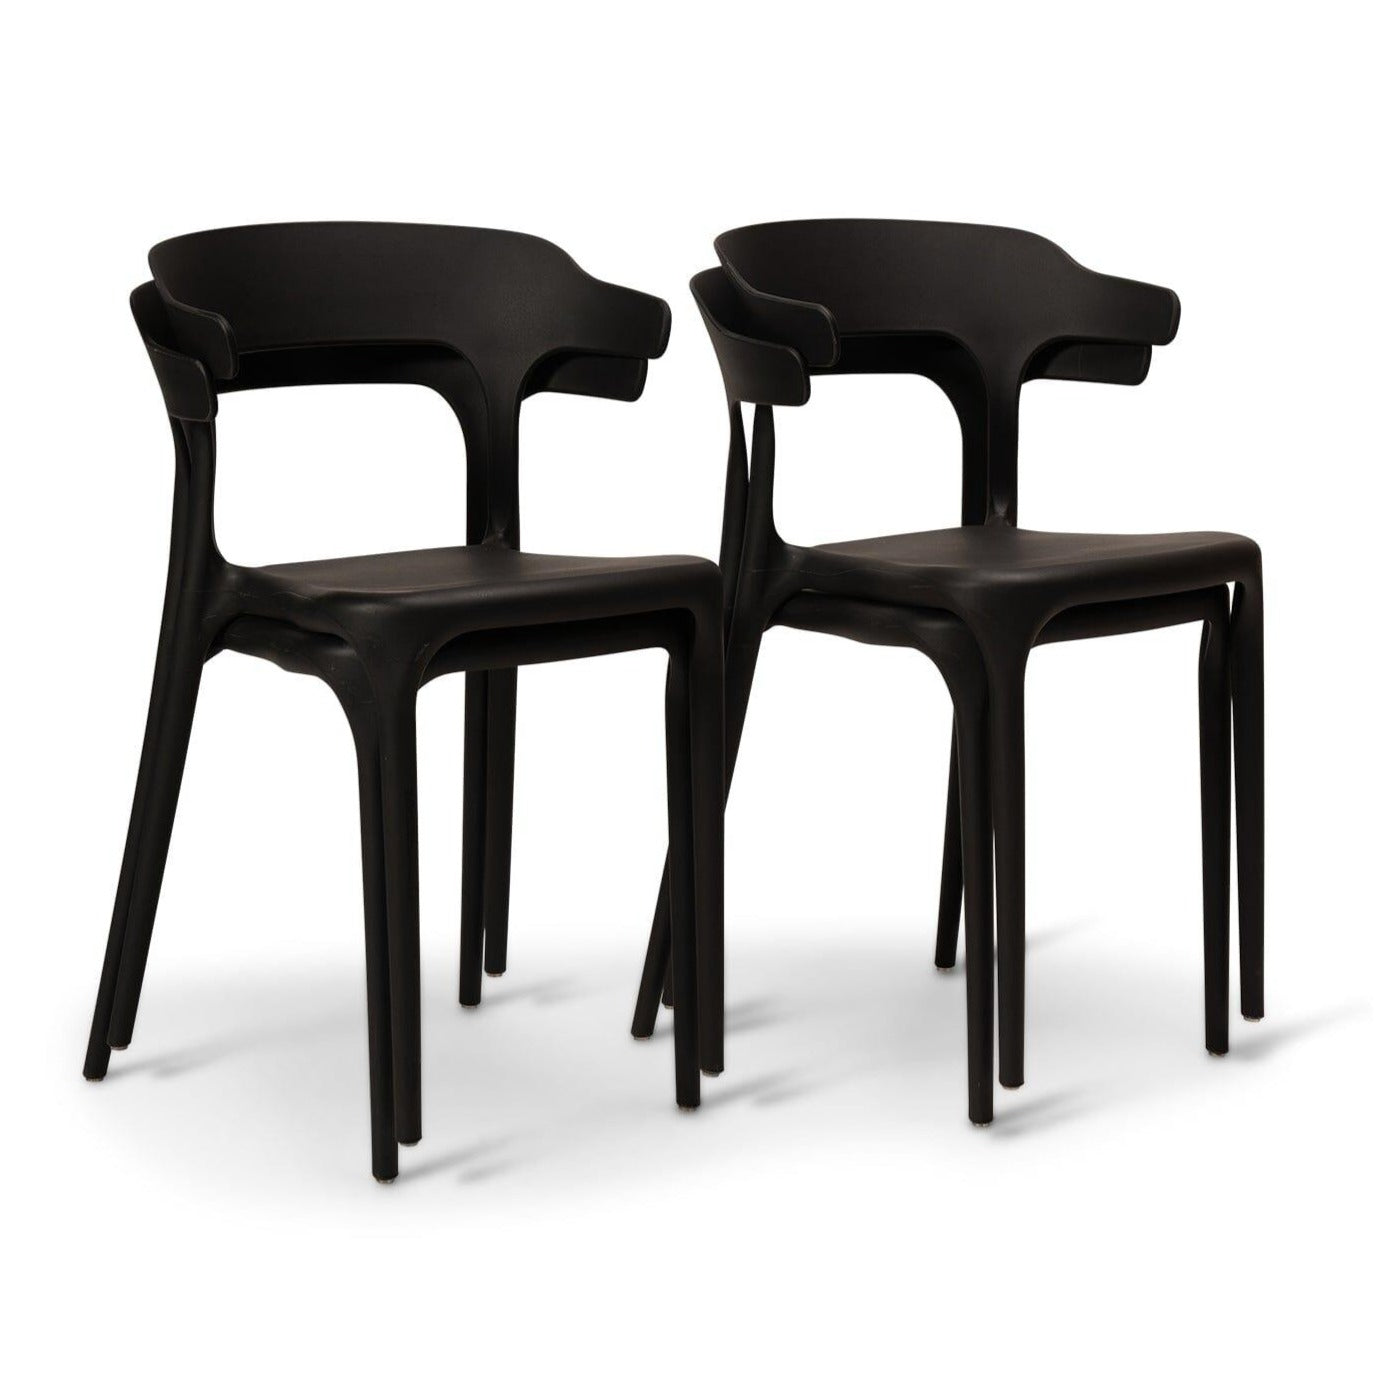 Finn dining chairs - set of 4 - black - Laura James